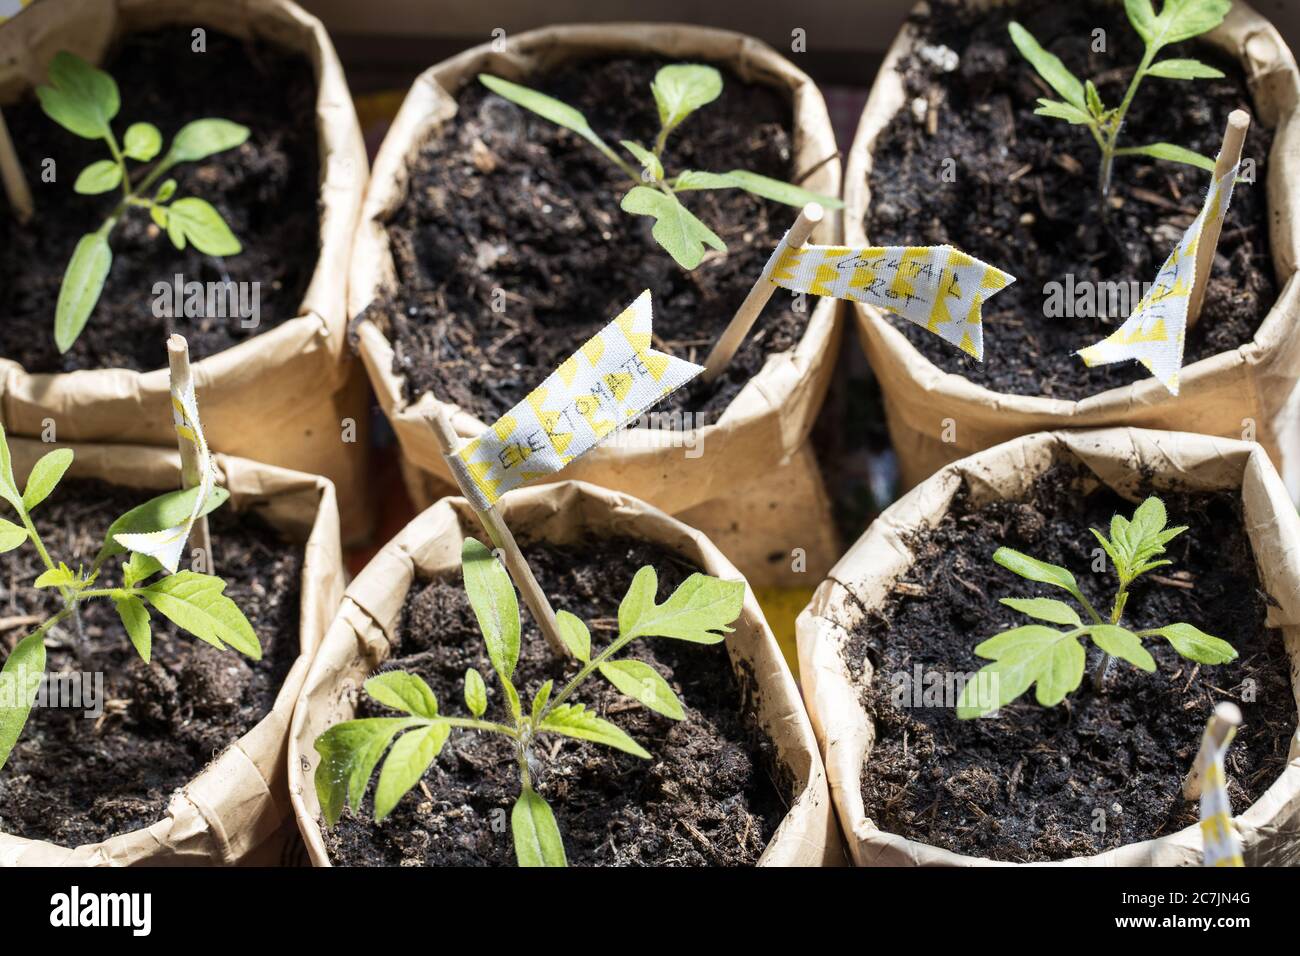 Homegrowing various tomato seedlings in DIY tetrapack plant pots Stock Photo